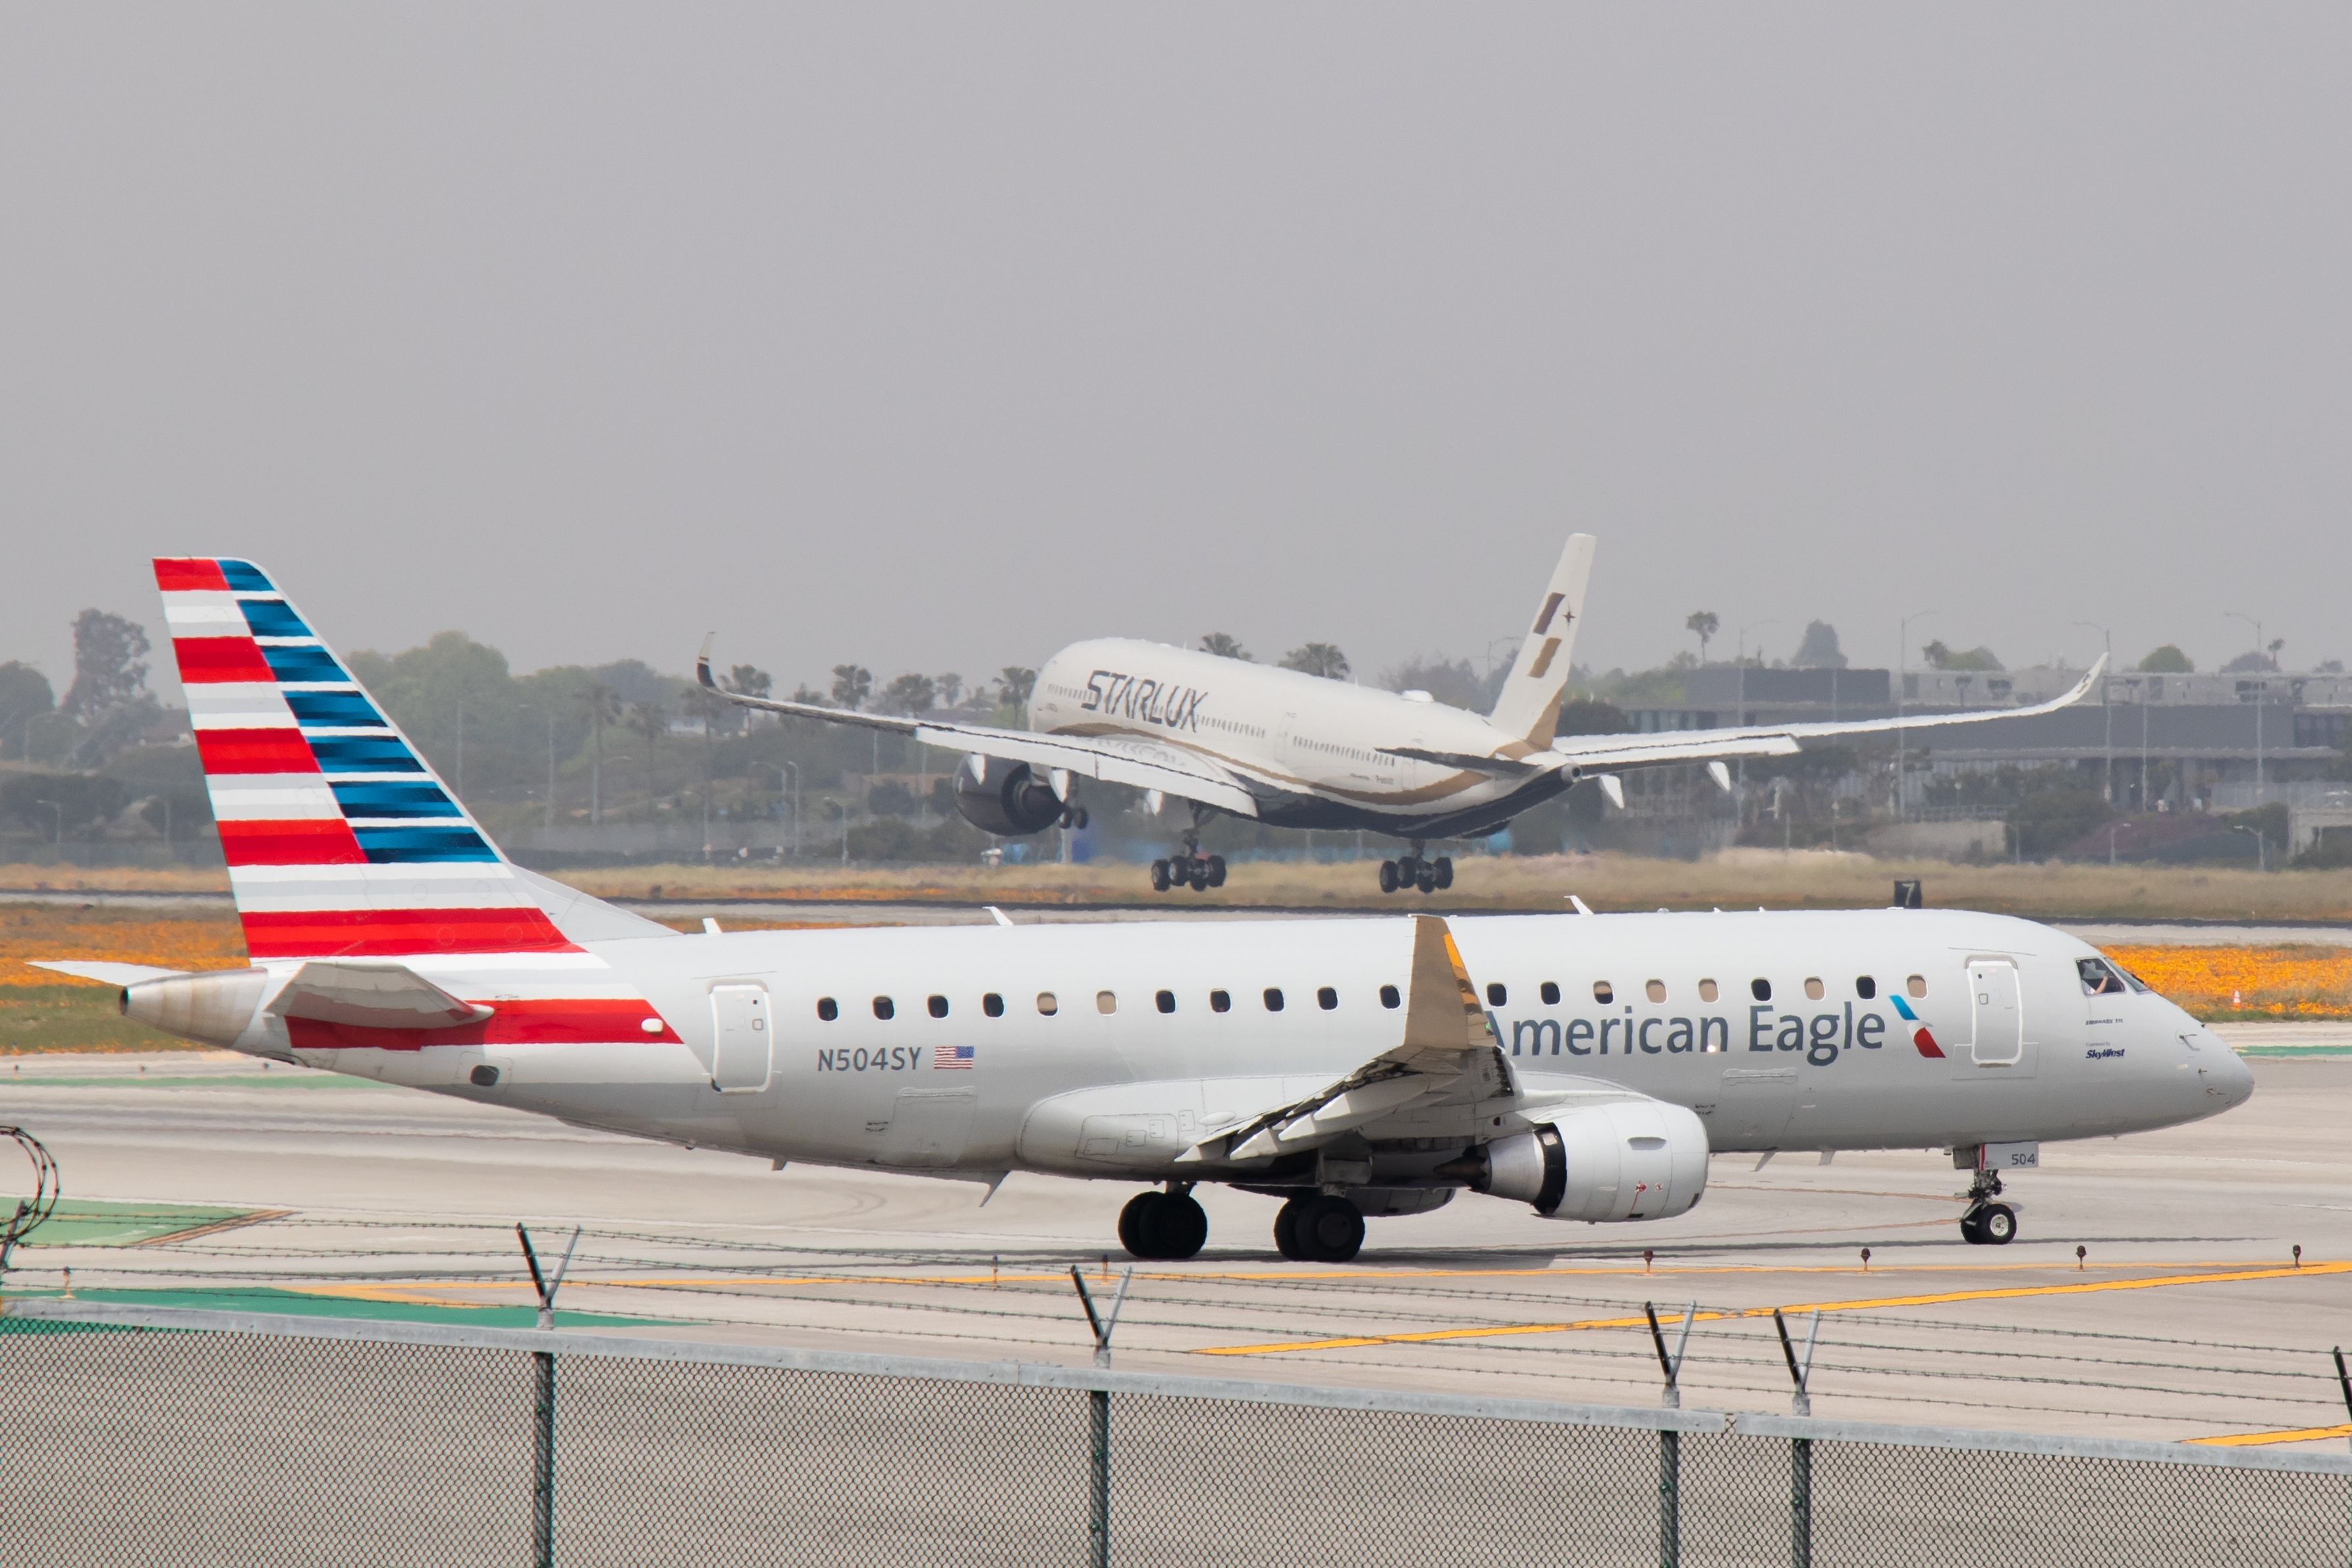 American Eagle (SkyWest Airlines) Embraer E175 (N504SY) at Los Angeles International Airport.